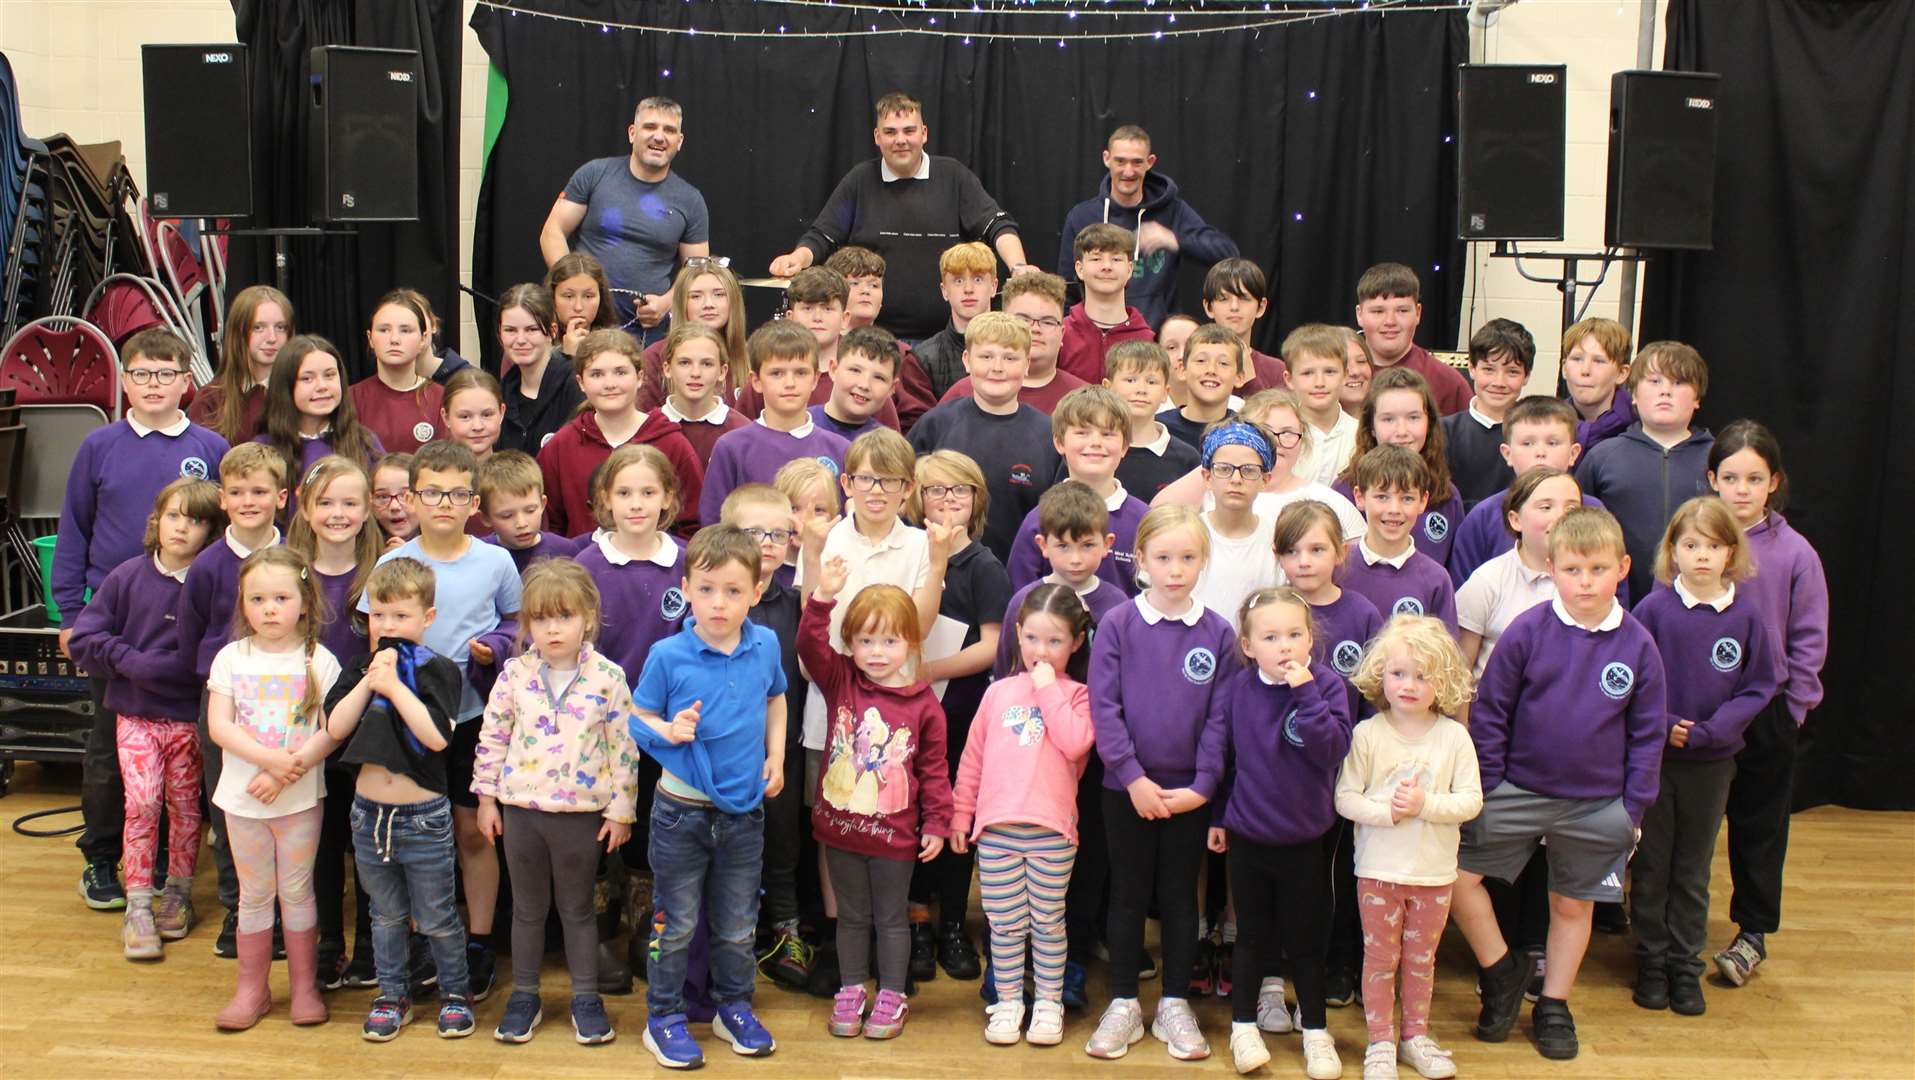 The students were kept in the dark about the performance until the very last moment when they were led from the school to Kinlochbervie Village Hall where the event was held.